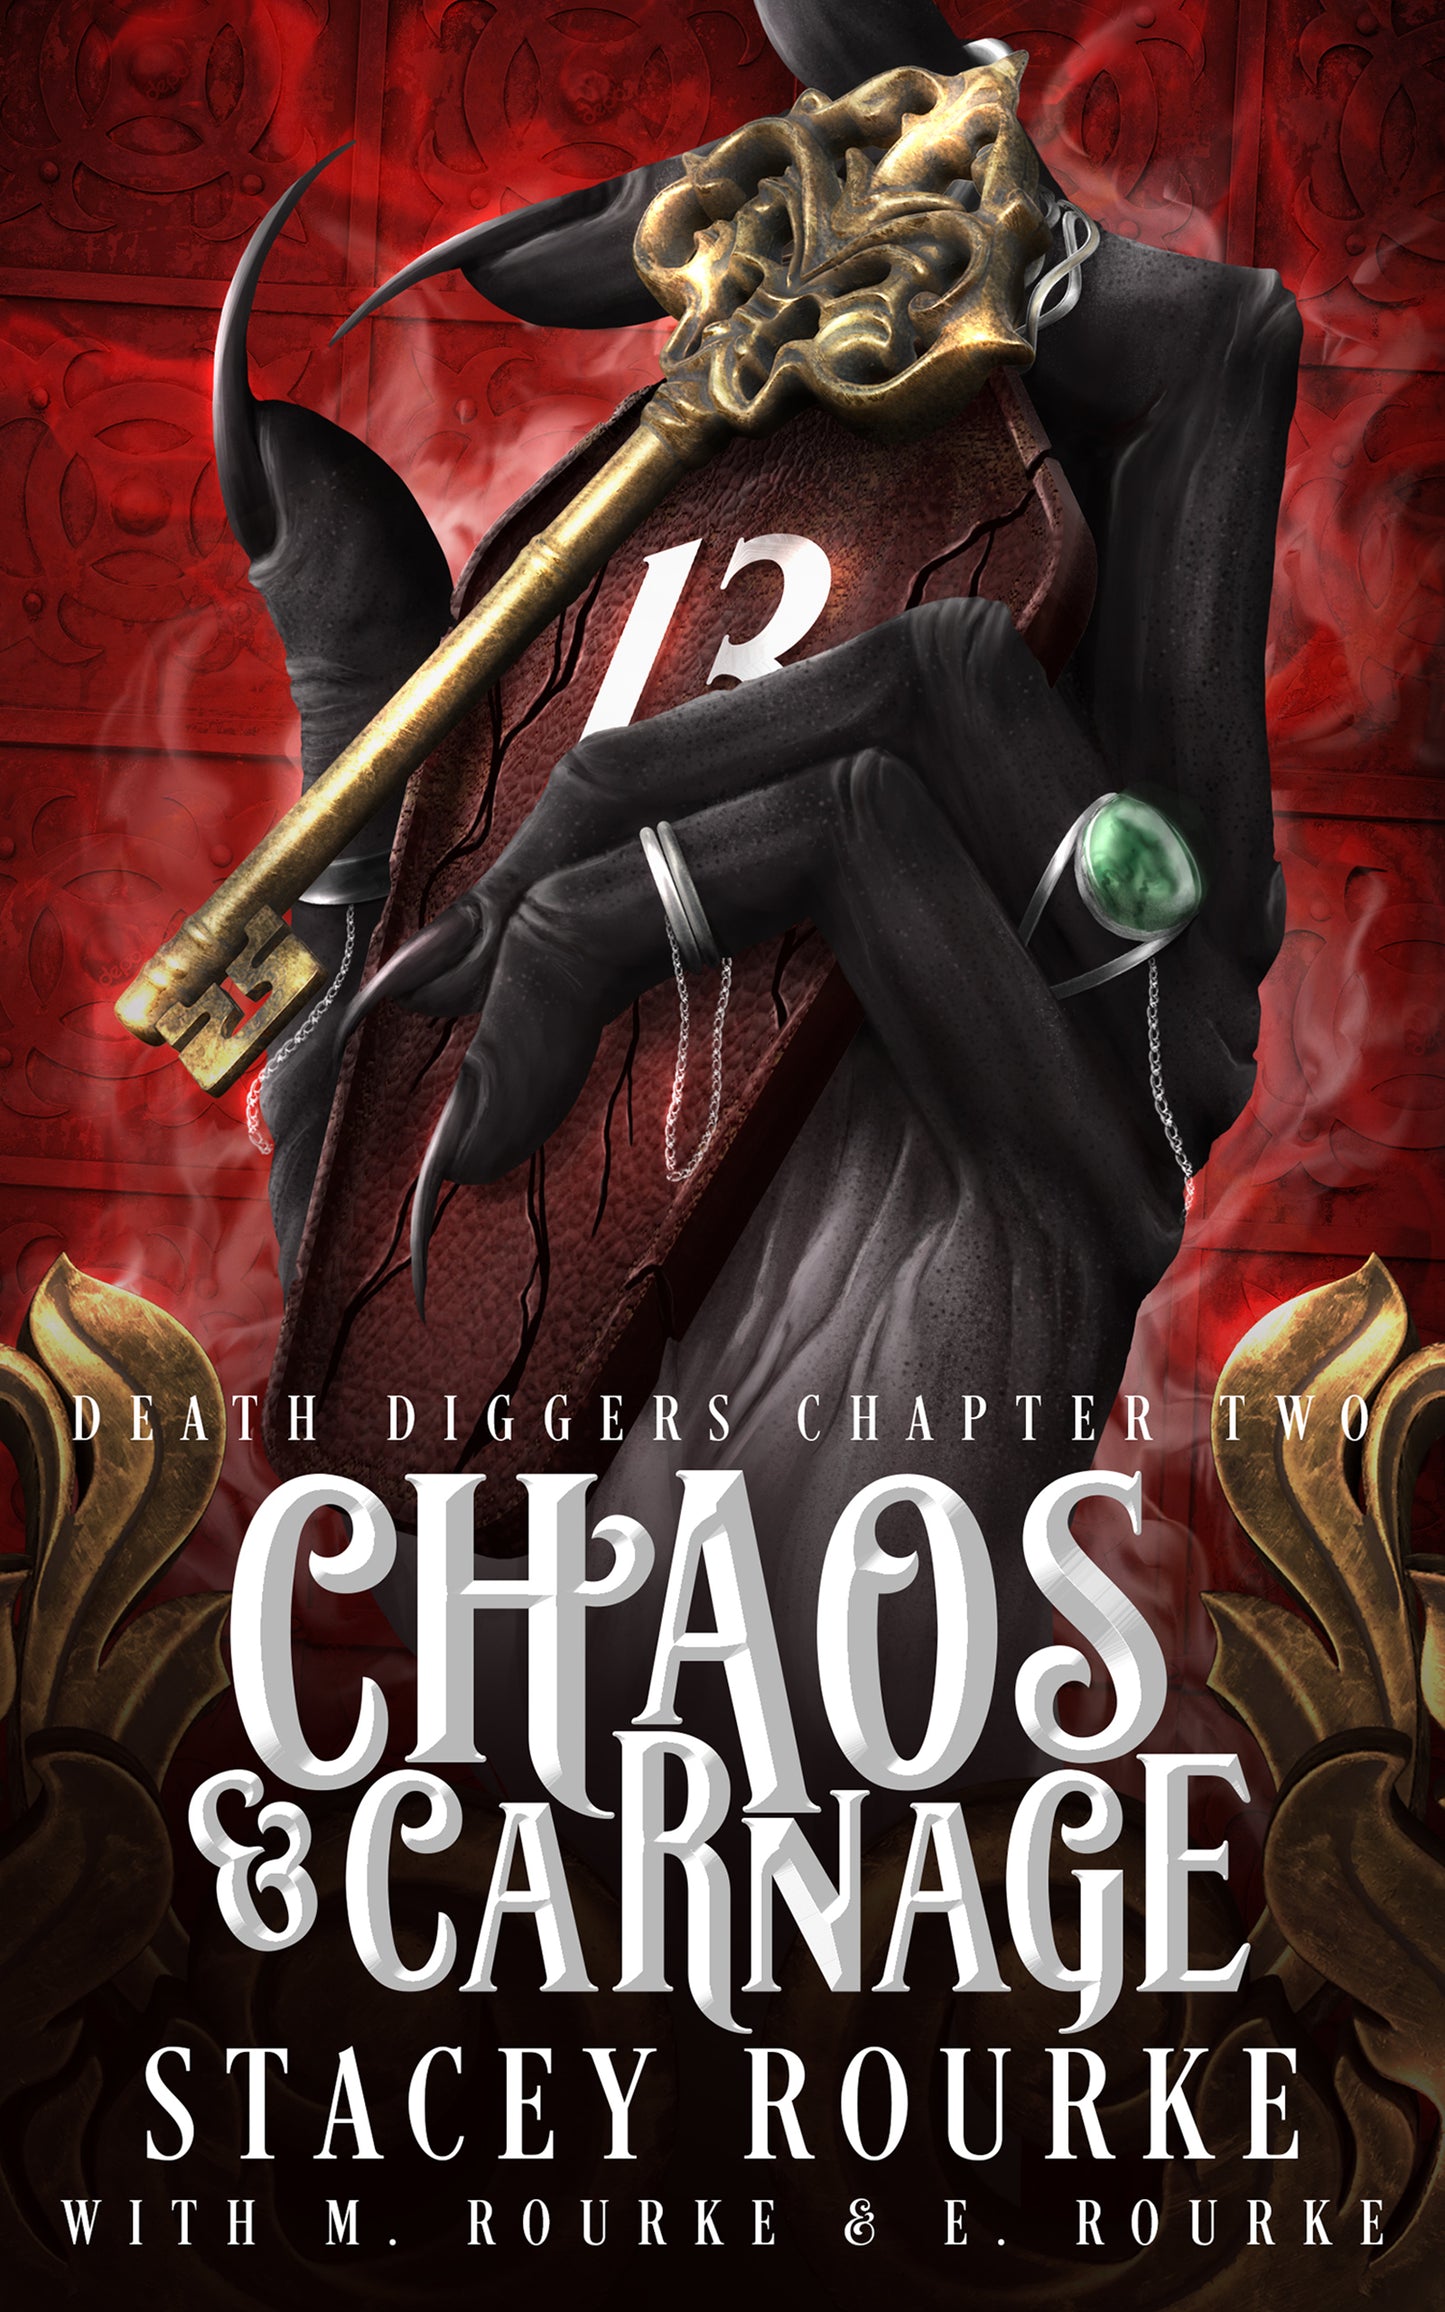 Death Diggers 5 - Signed Paperback of Chaos & Carnage